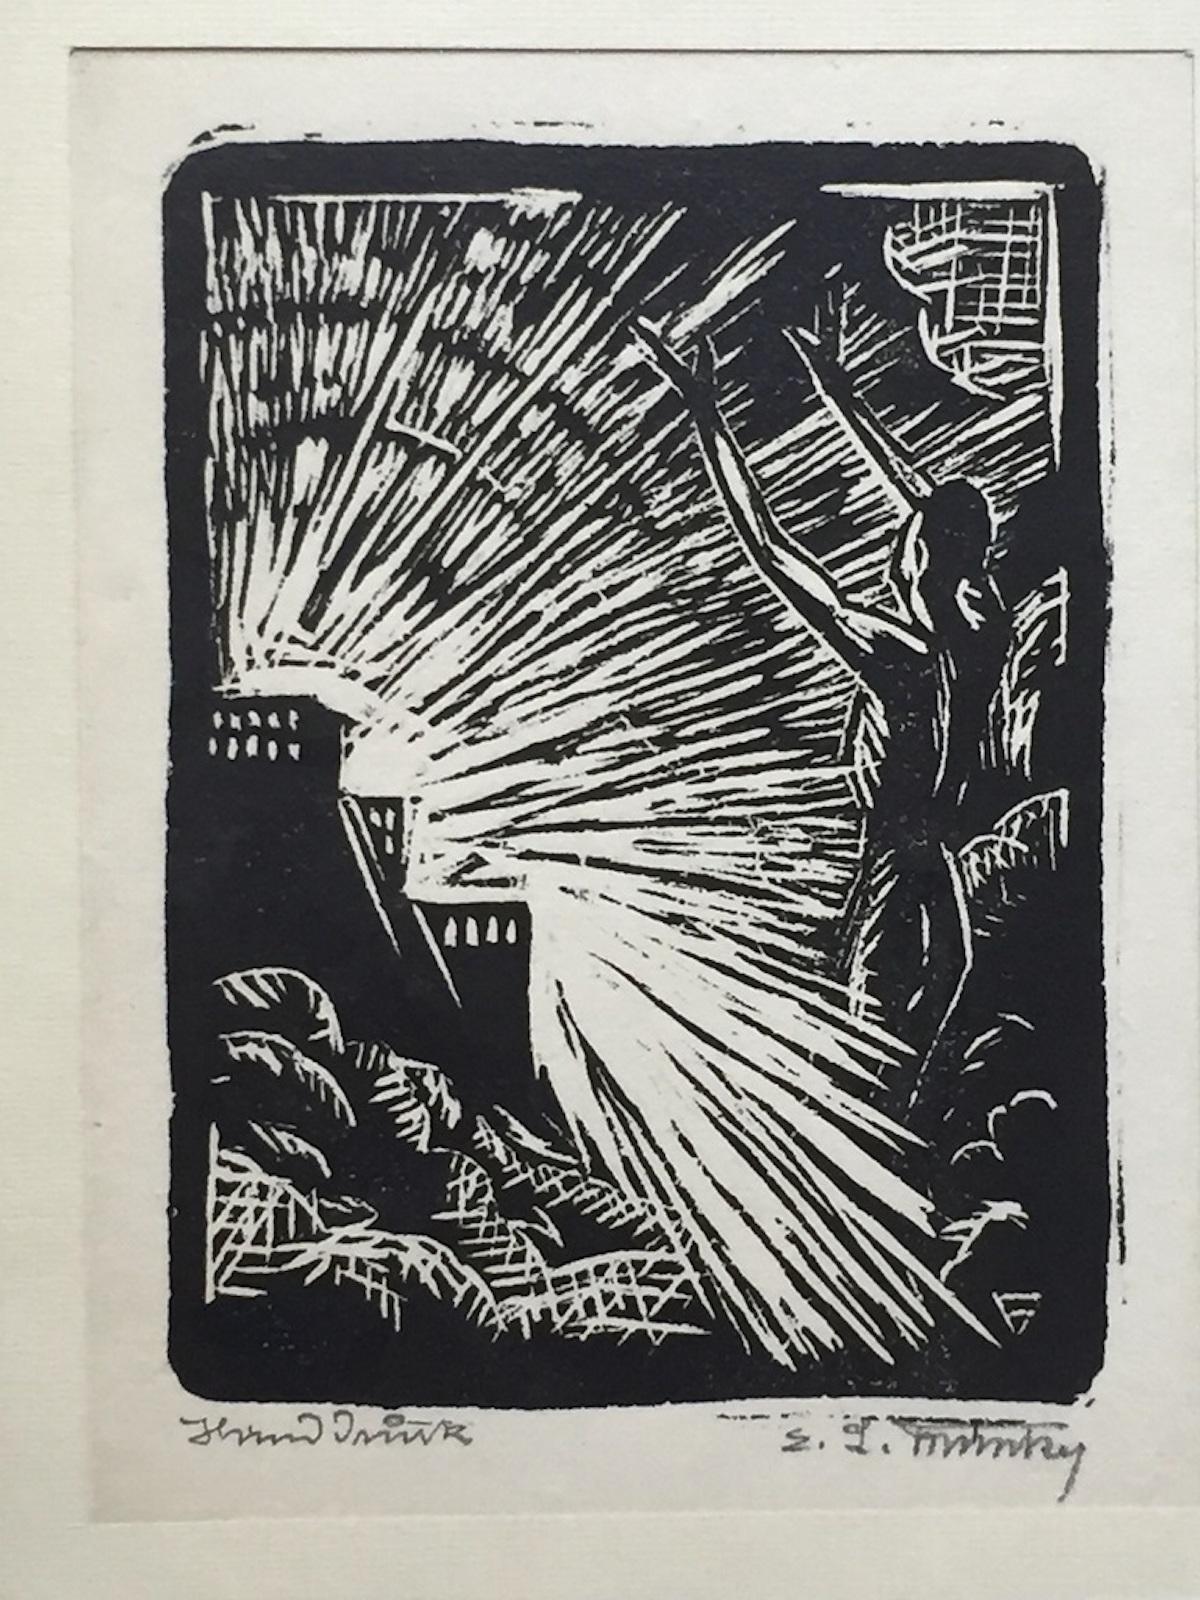 Unknown Figurative Print - The Evocation - Woodcut - Early 20th Century